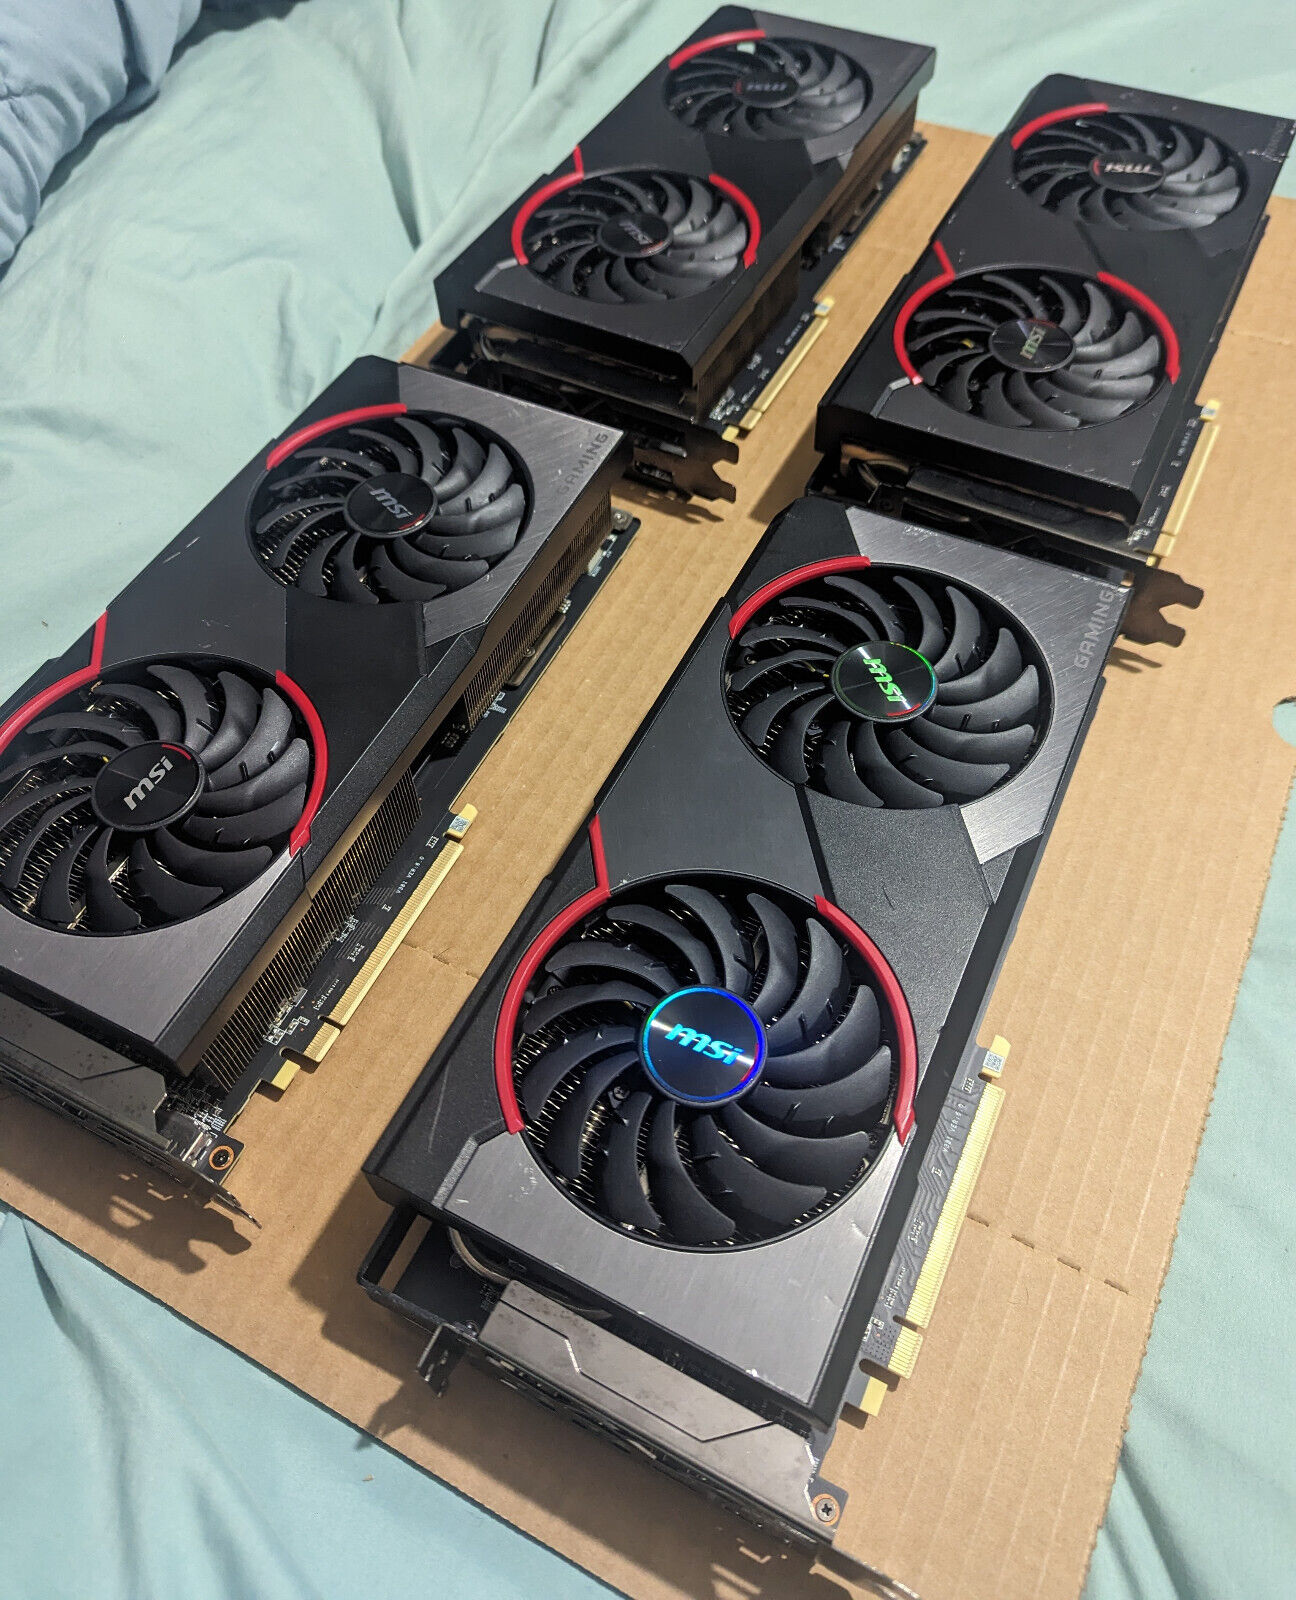 MSI Radeon RX 5700 XT GAMING X 8GB GDDR6 Graphics Cards Used, Tested, and Works